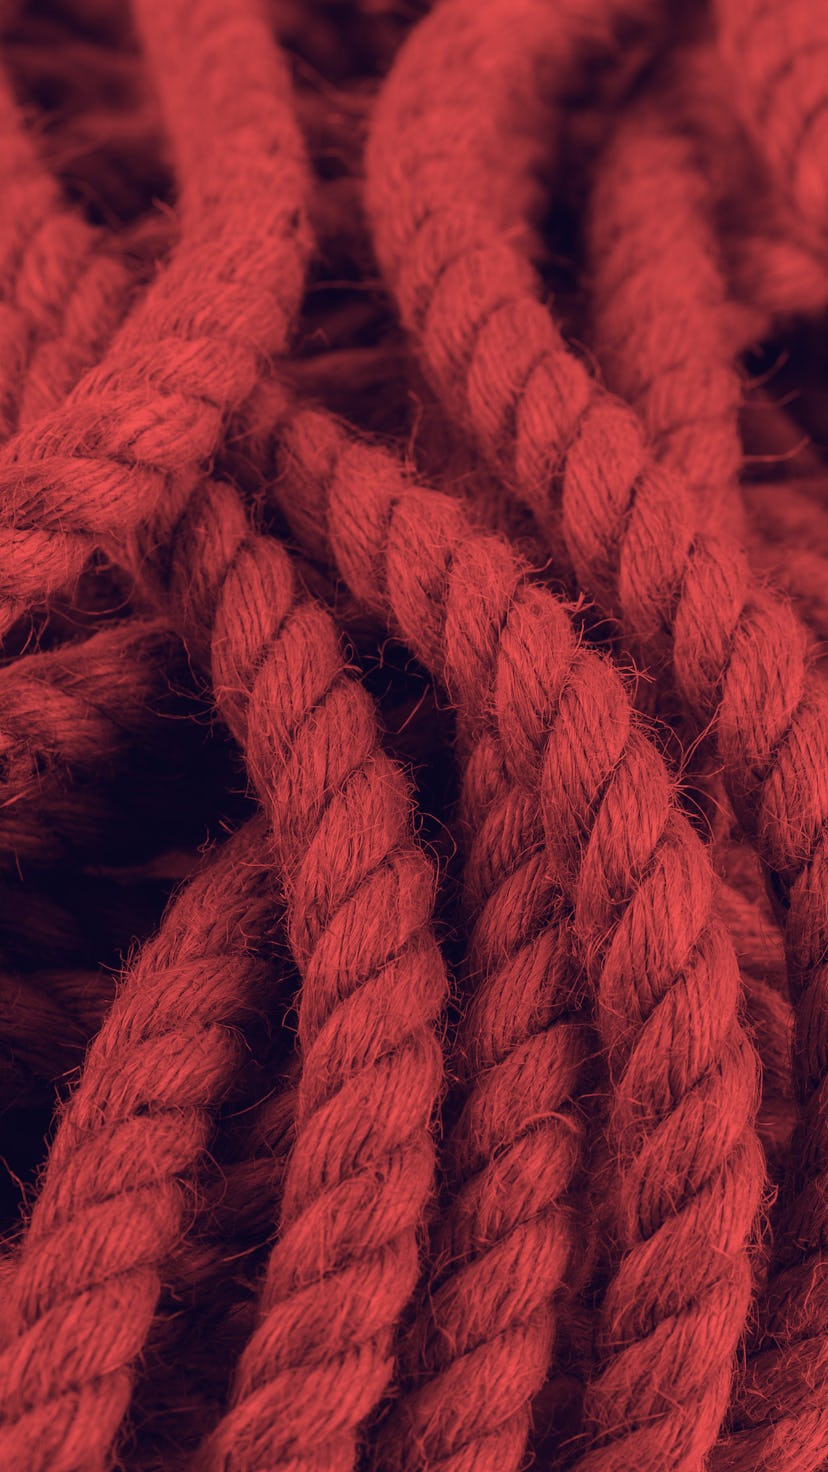 natural rope close-up view background with selective focus.